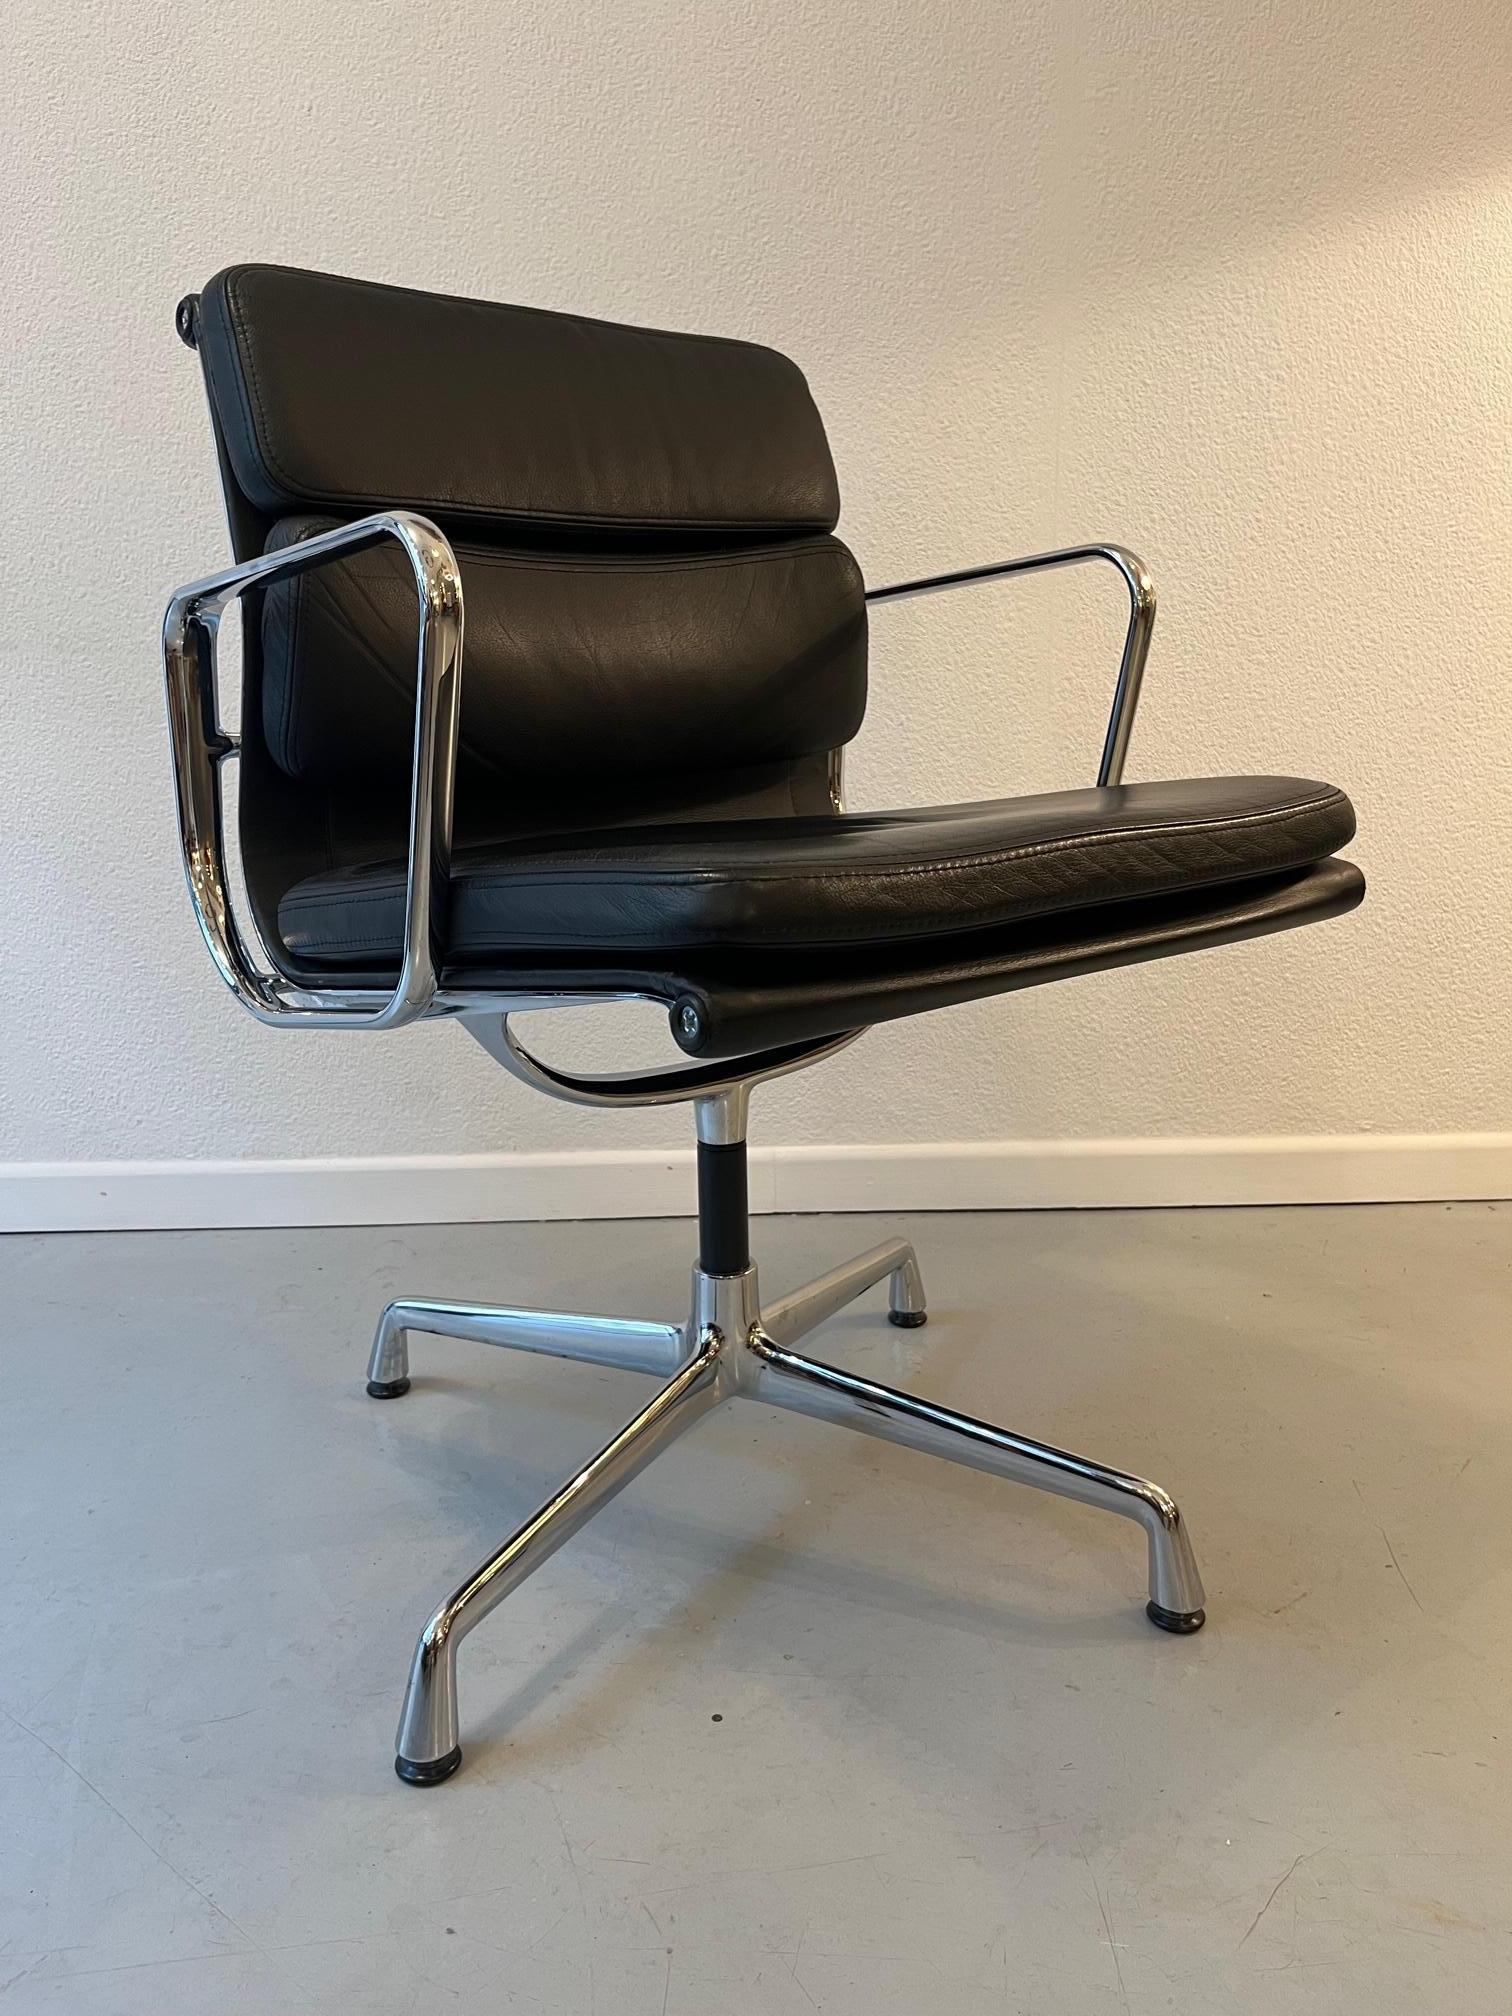 Black leather and chromed steel Soft pad office chair by Charles & Ray Eames produced by Vitra, ca. 2000s
Very good condition. Like new.
3 available.
